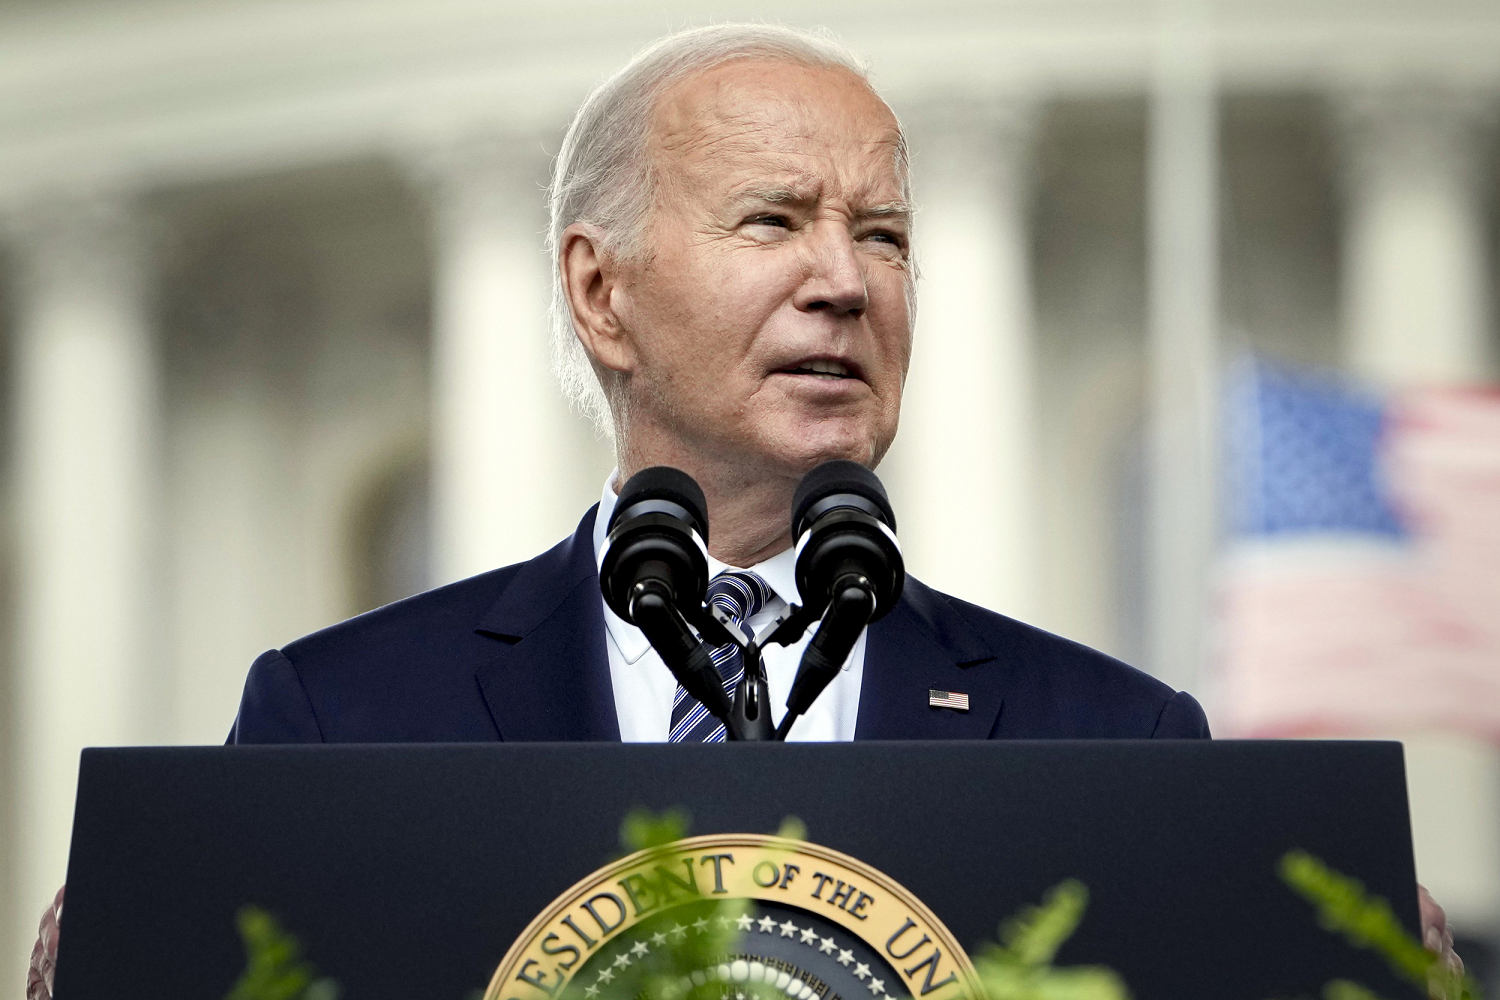 Biden delivers Morehouse commencement speech as some students and faculty express pro-Palestinian messages